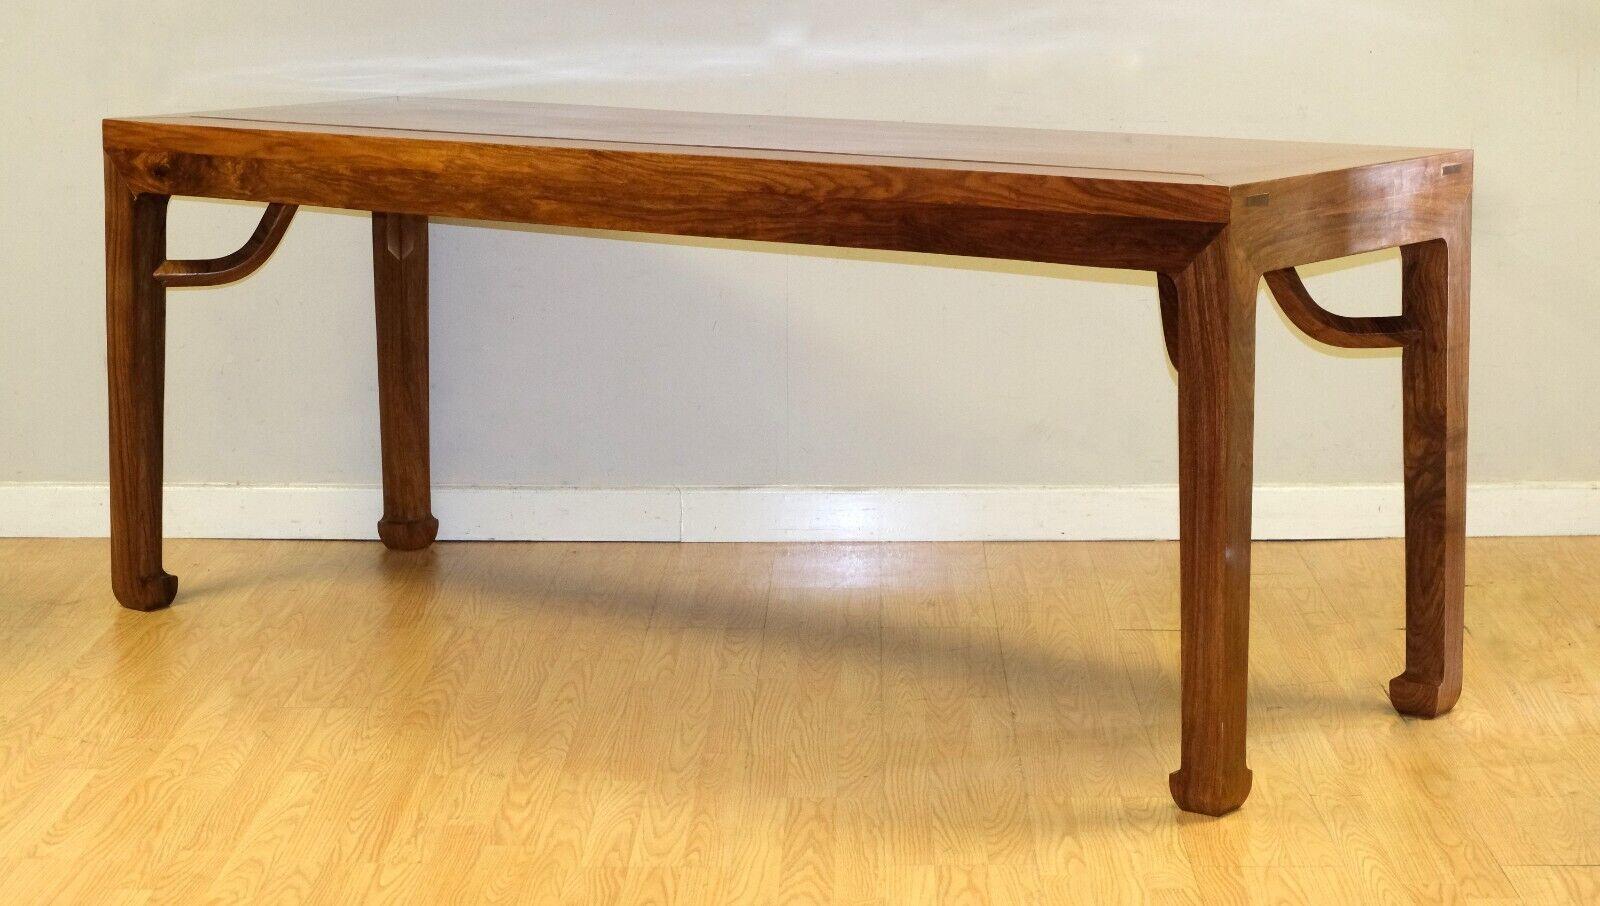 We are delighted to offer for sale this stunning Ming Elmwood dining table raised on horse hoof solid feet.

This chunky but stylish piece is simple eye catching from any angle. The horse feet has S shape supports, all fitted into the underside of